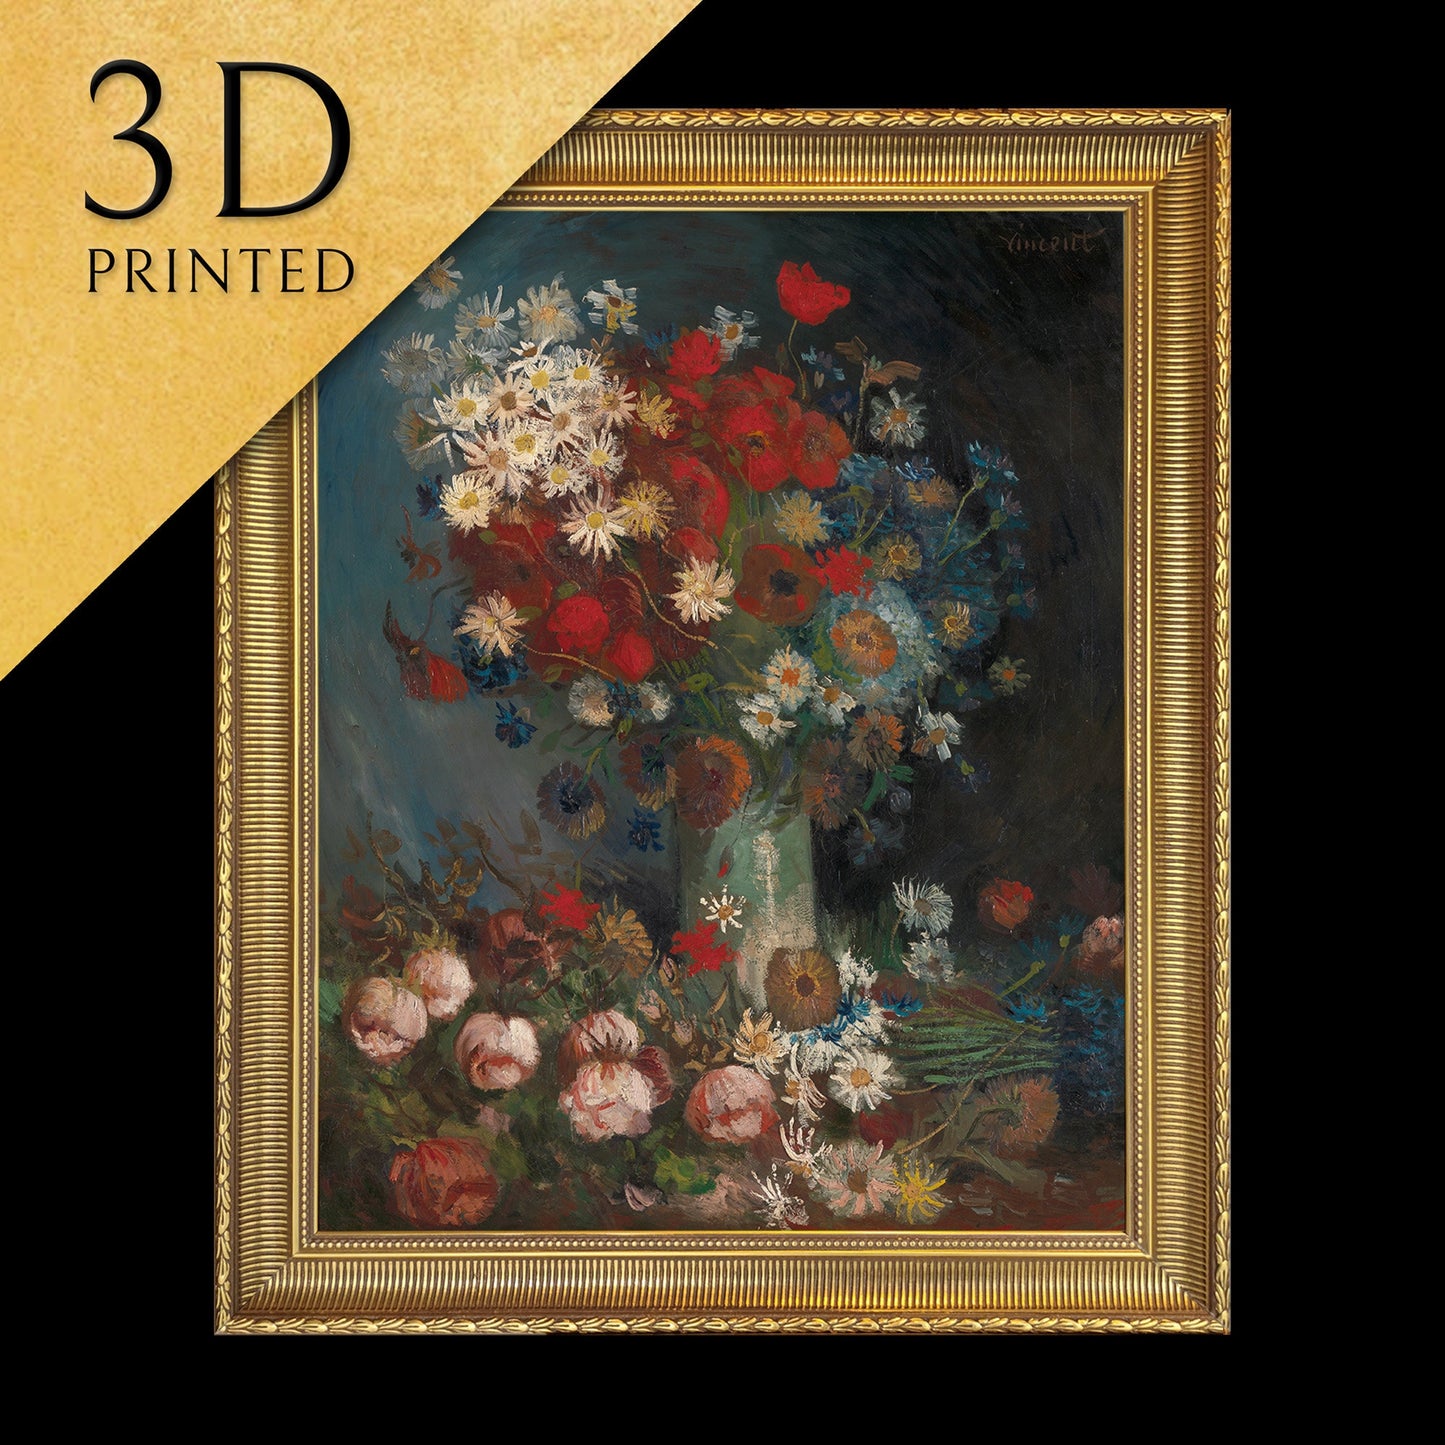 Still Life with meadow Flowers by Vincent Van Gogh, 3d Printed with texture and brush strokes looks like original oil-painting, code:341